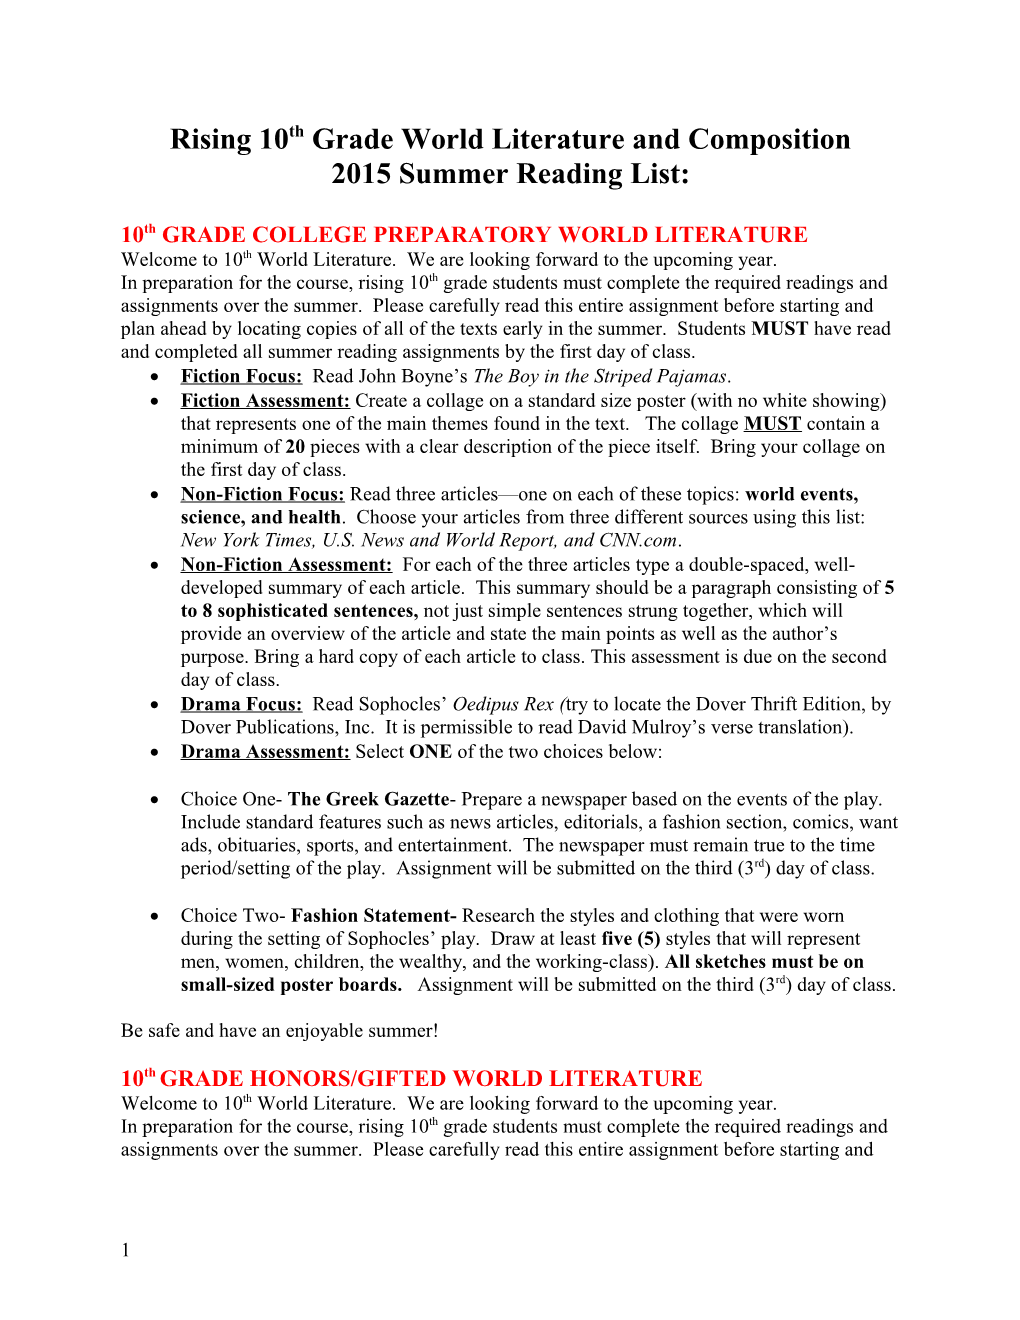 Rising 10Thgrade World Literature and Composition 2015 Summer Reading List